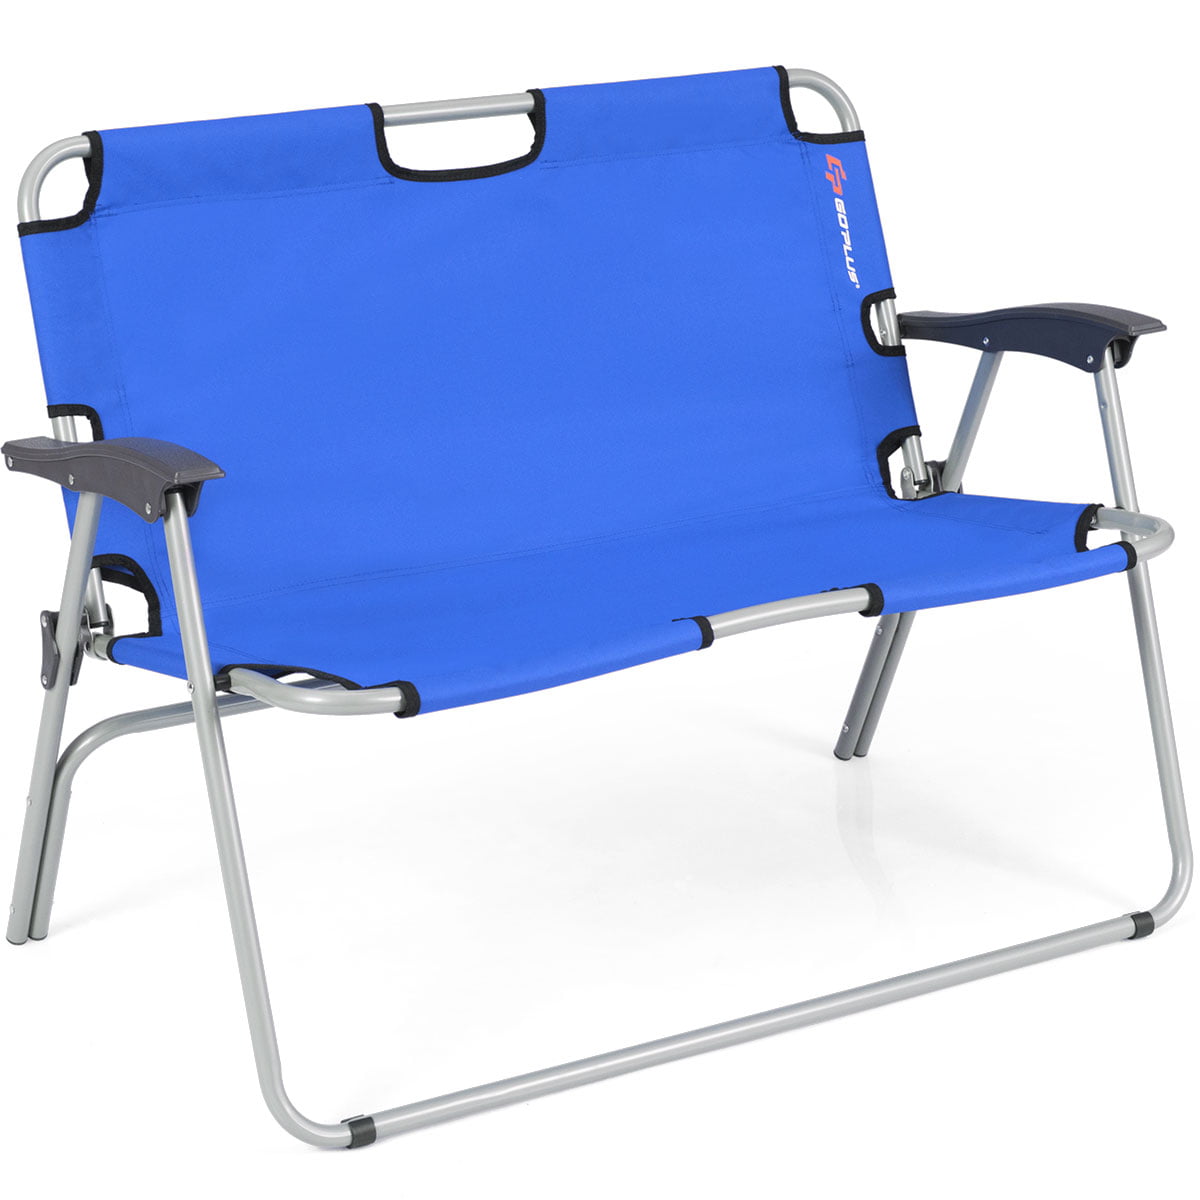 Costway 2 Person Folding Camping Bench Portable Loveseat